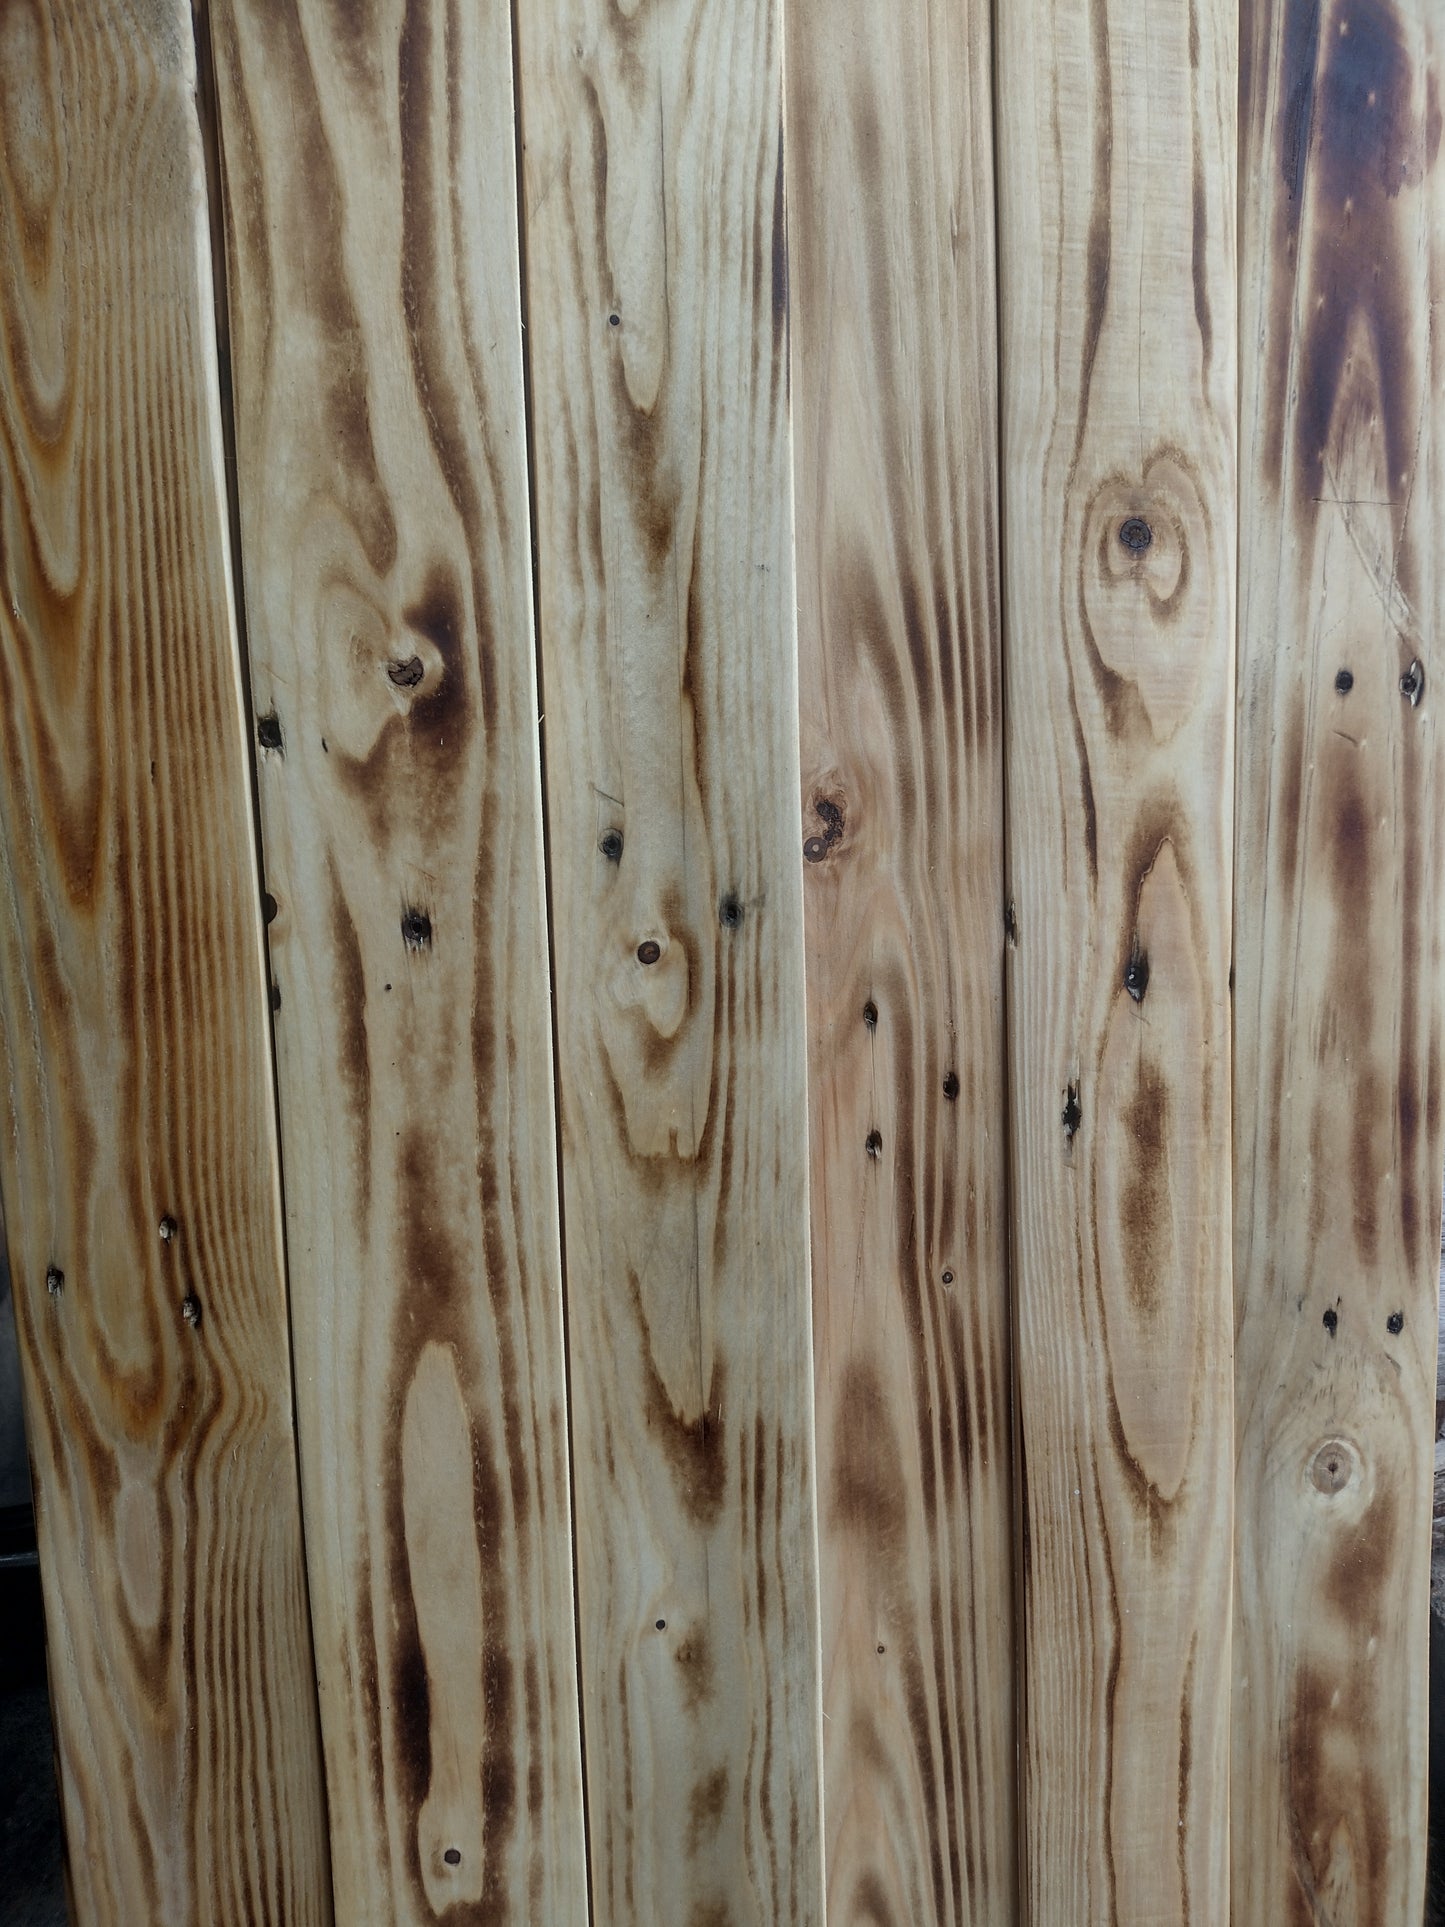 Charred Wooden Planks 1sqm  - Sanded and De-nailed - Lightweight Planks